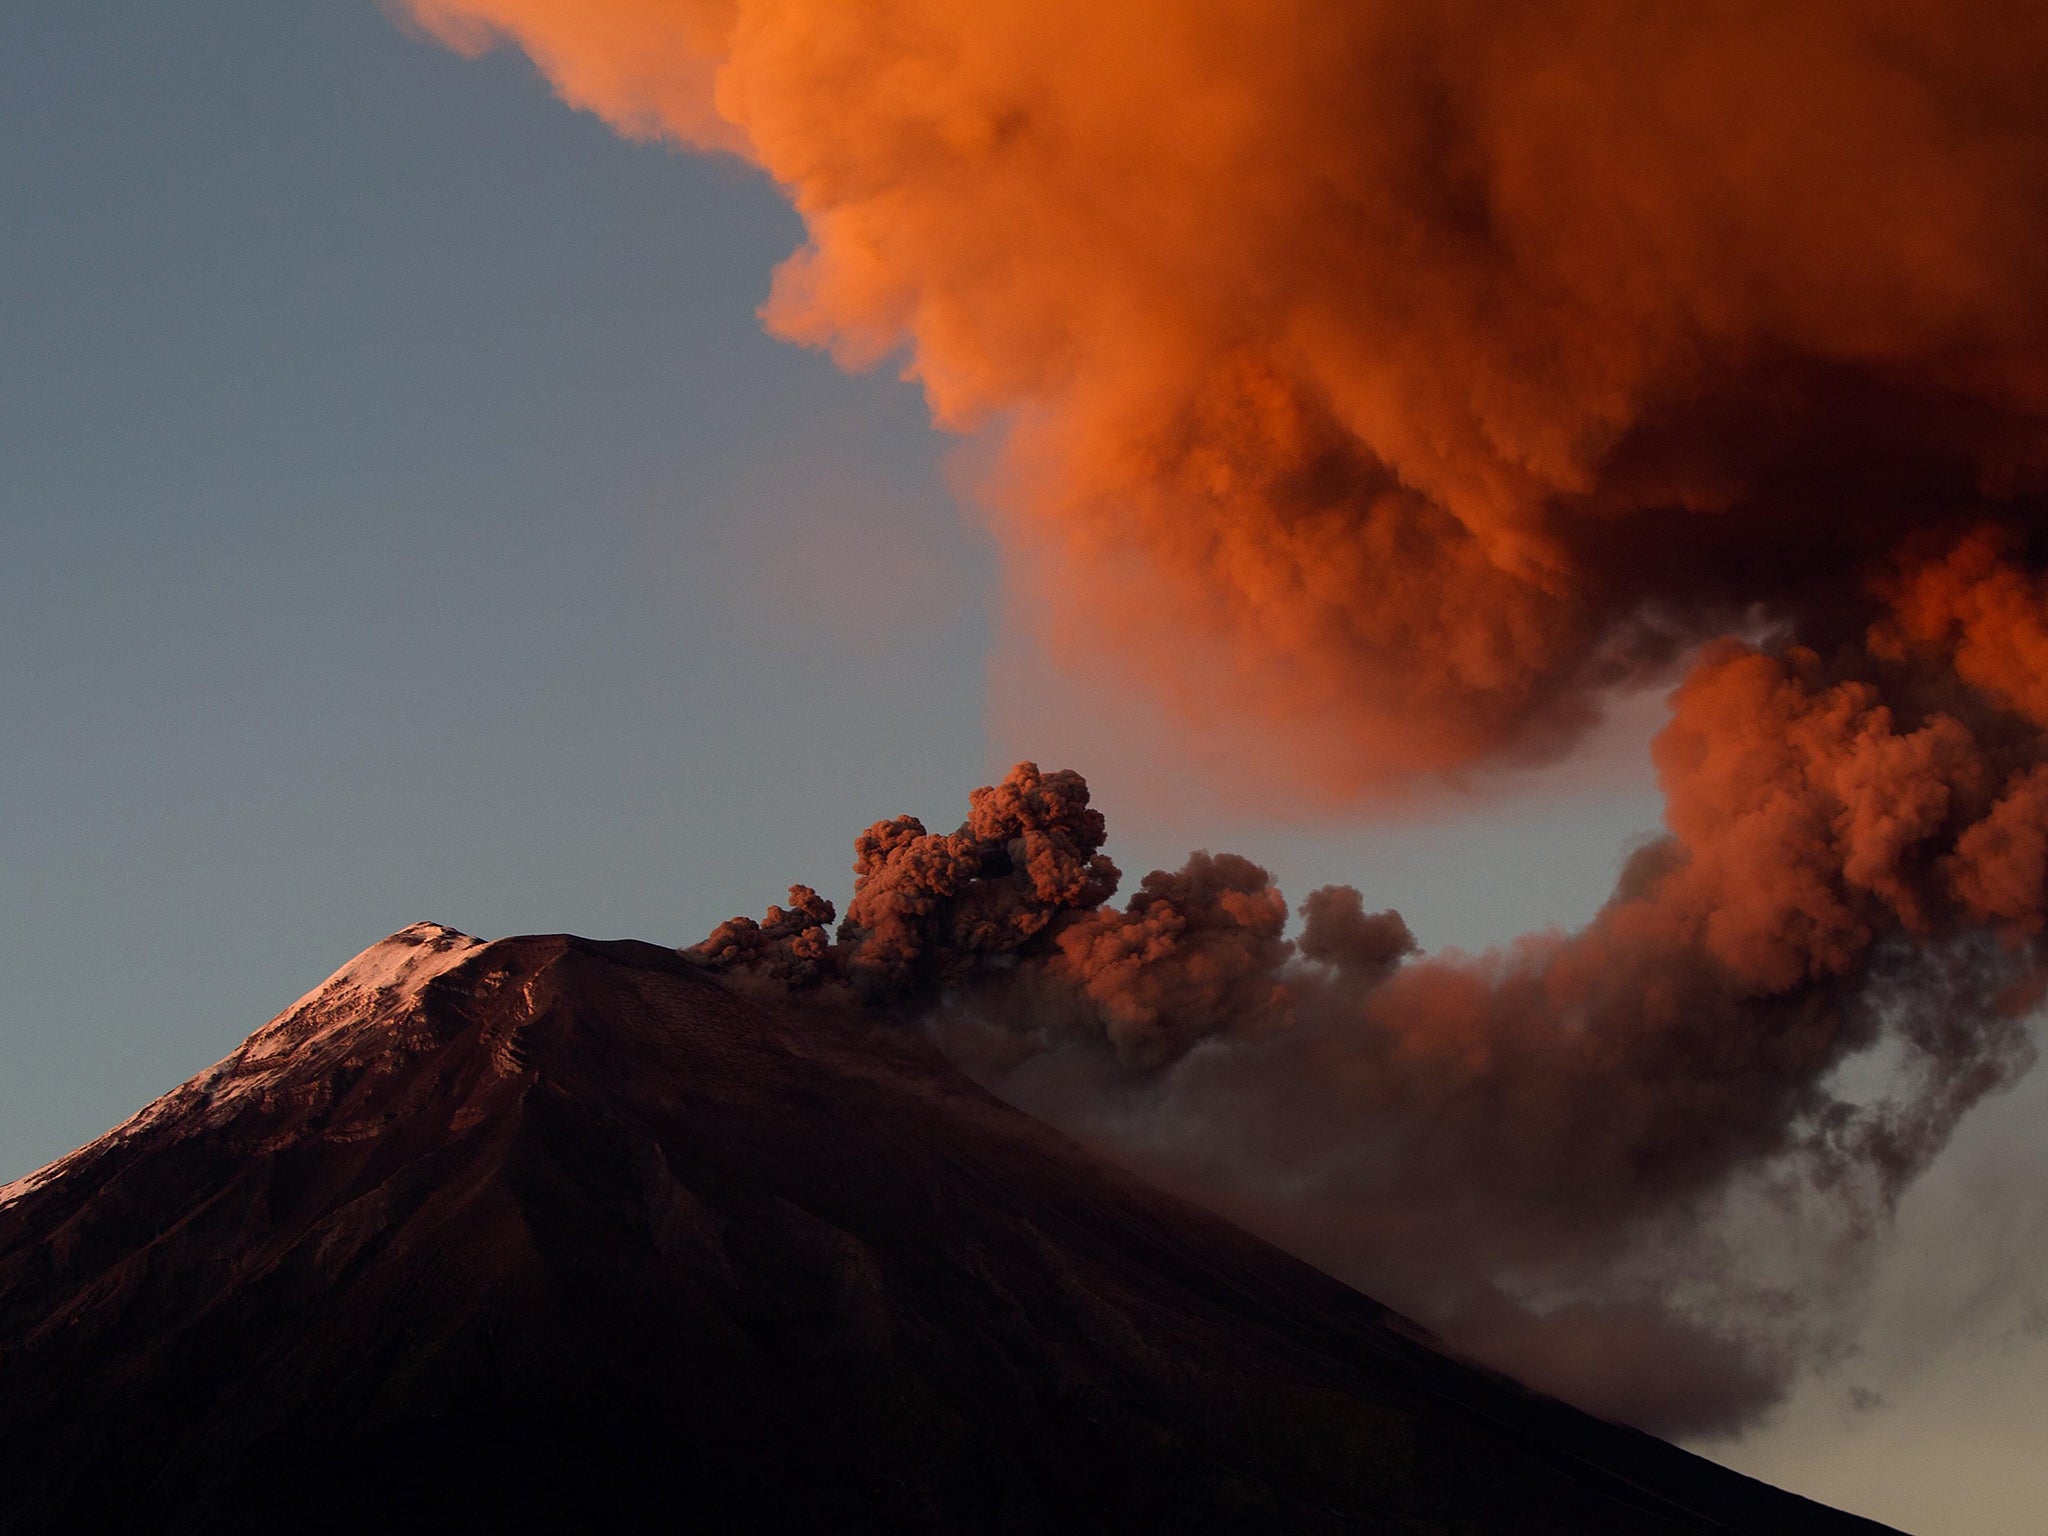 The Tungurahua volcano remains in 'high activity' according to authorities and more than a hundred volunteers have arrives to the site, coordinated by authorities, due the increase of the activity of the volcano